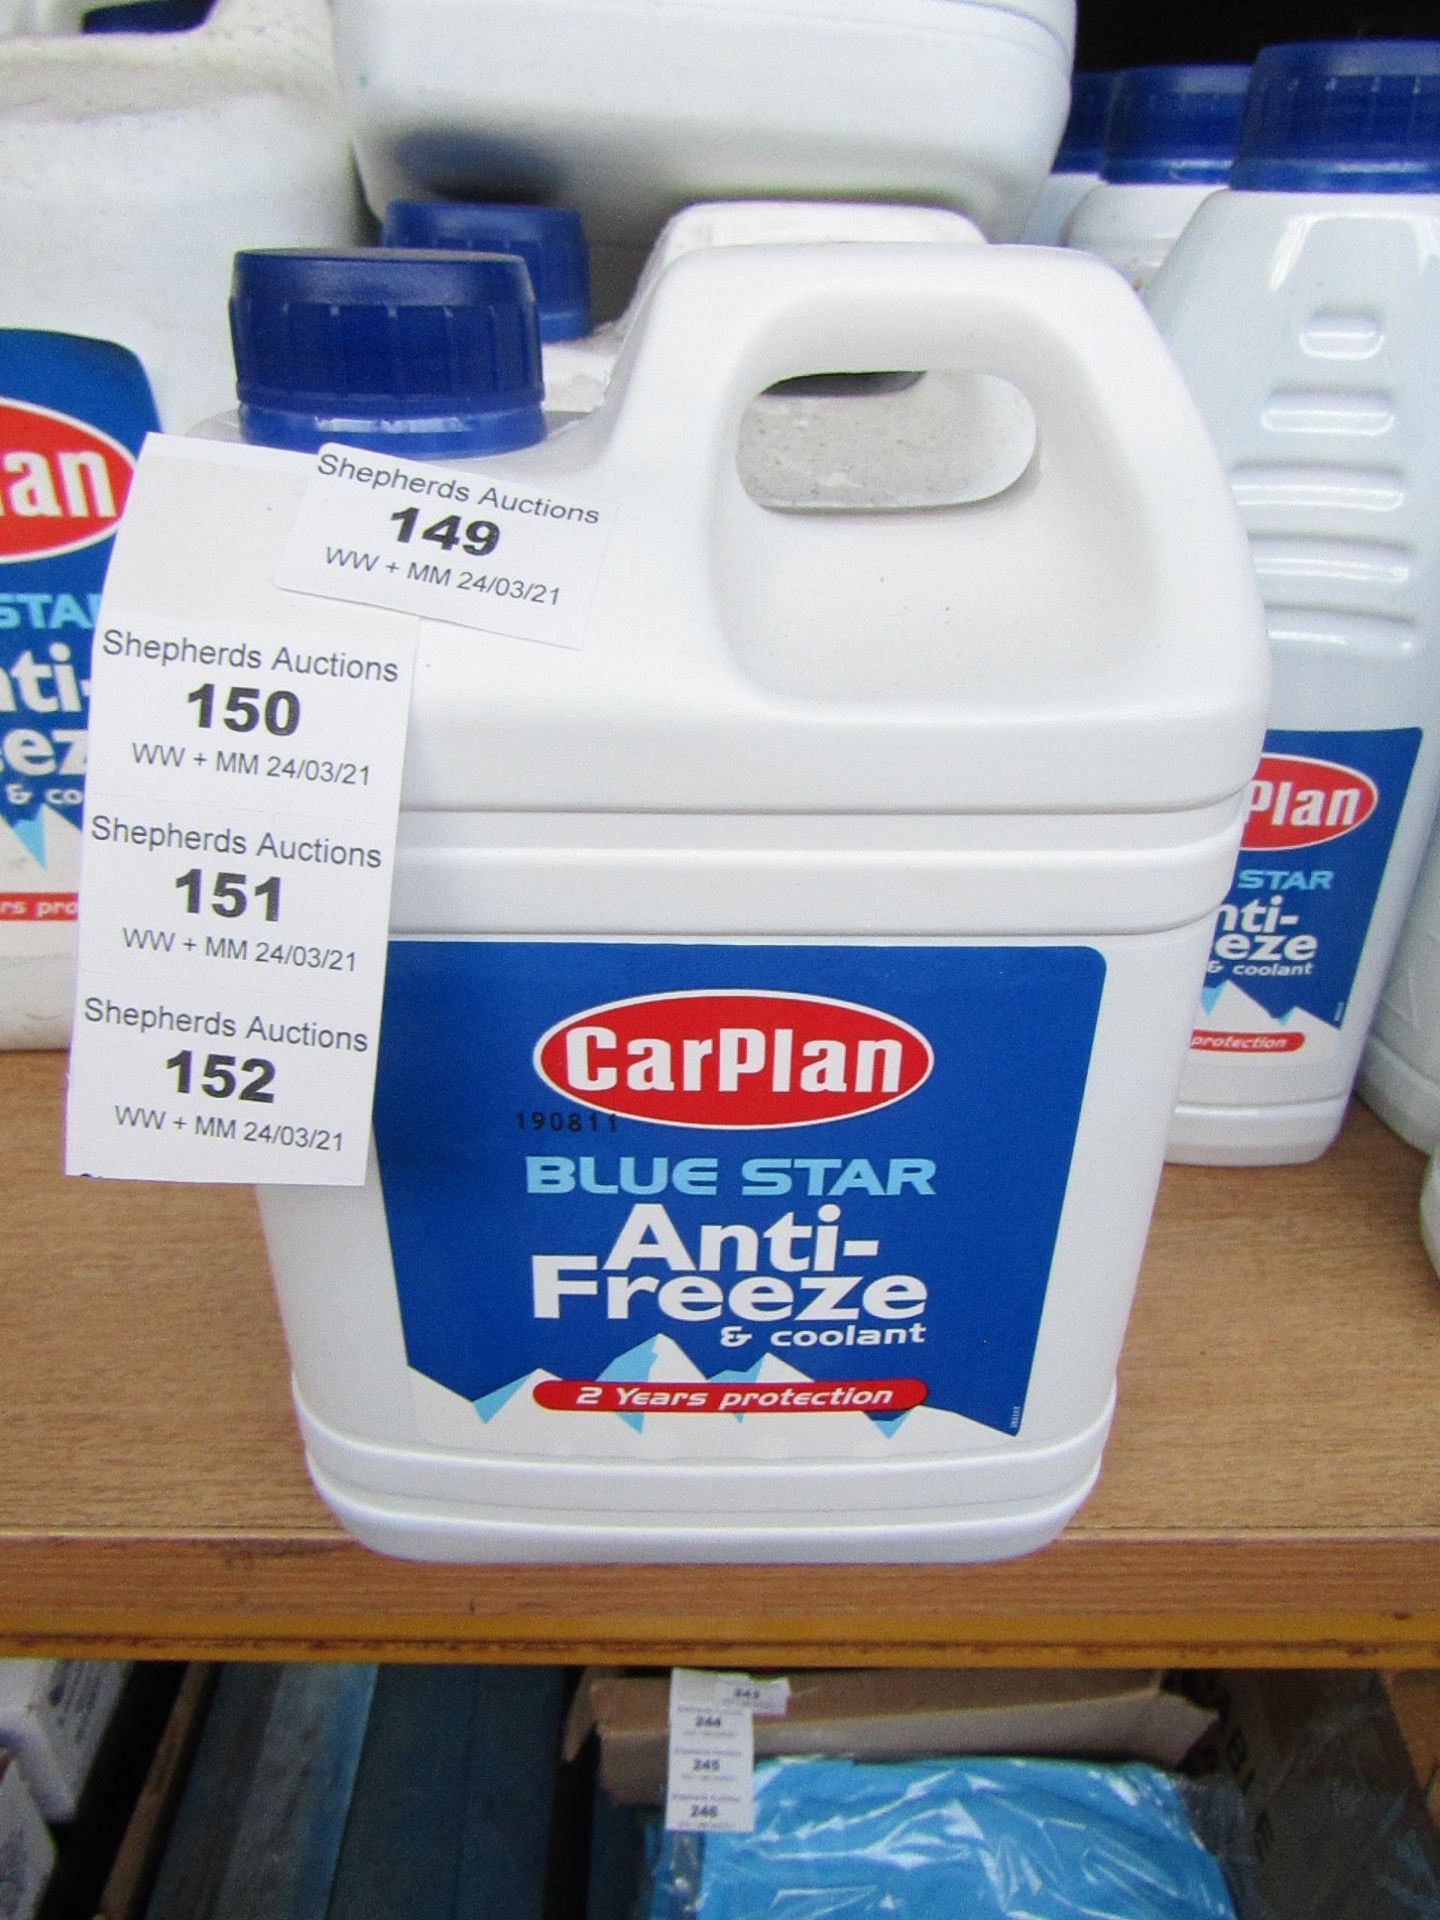 4x 2L Tubs of Car Plan Blue star anti freeze and coolant, new, RRP £6.49 each